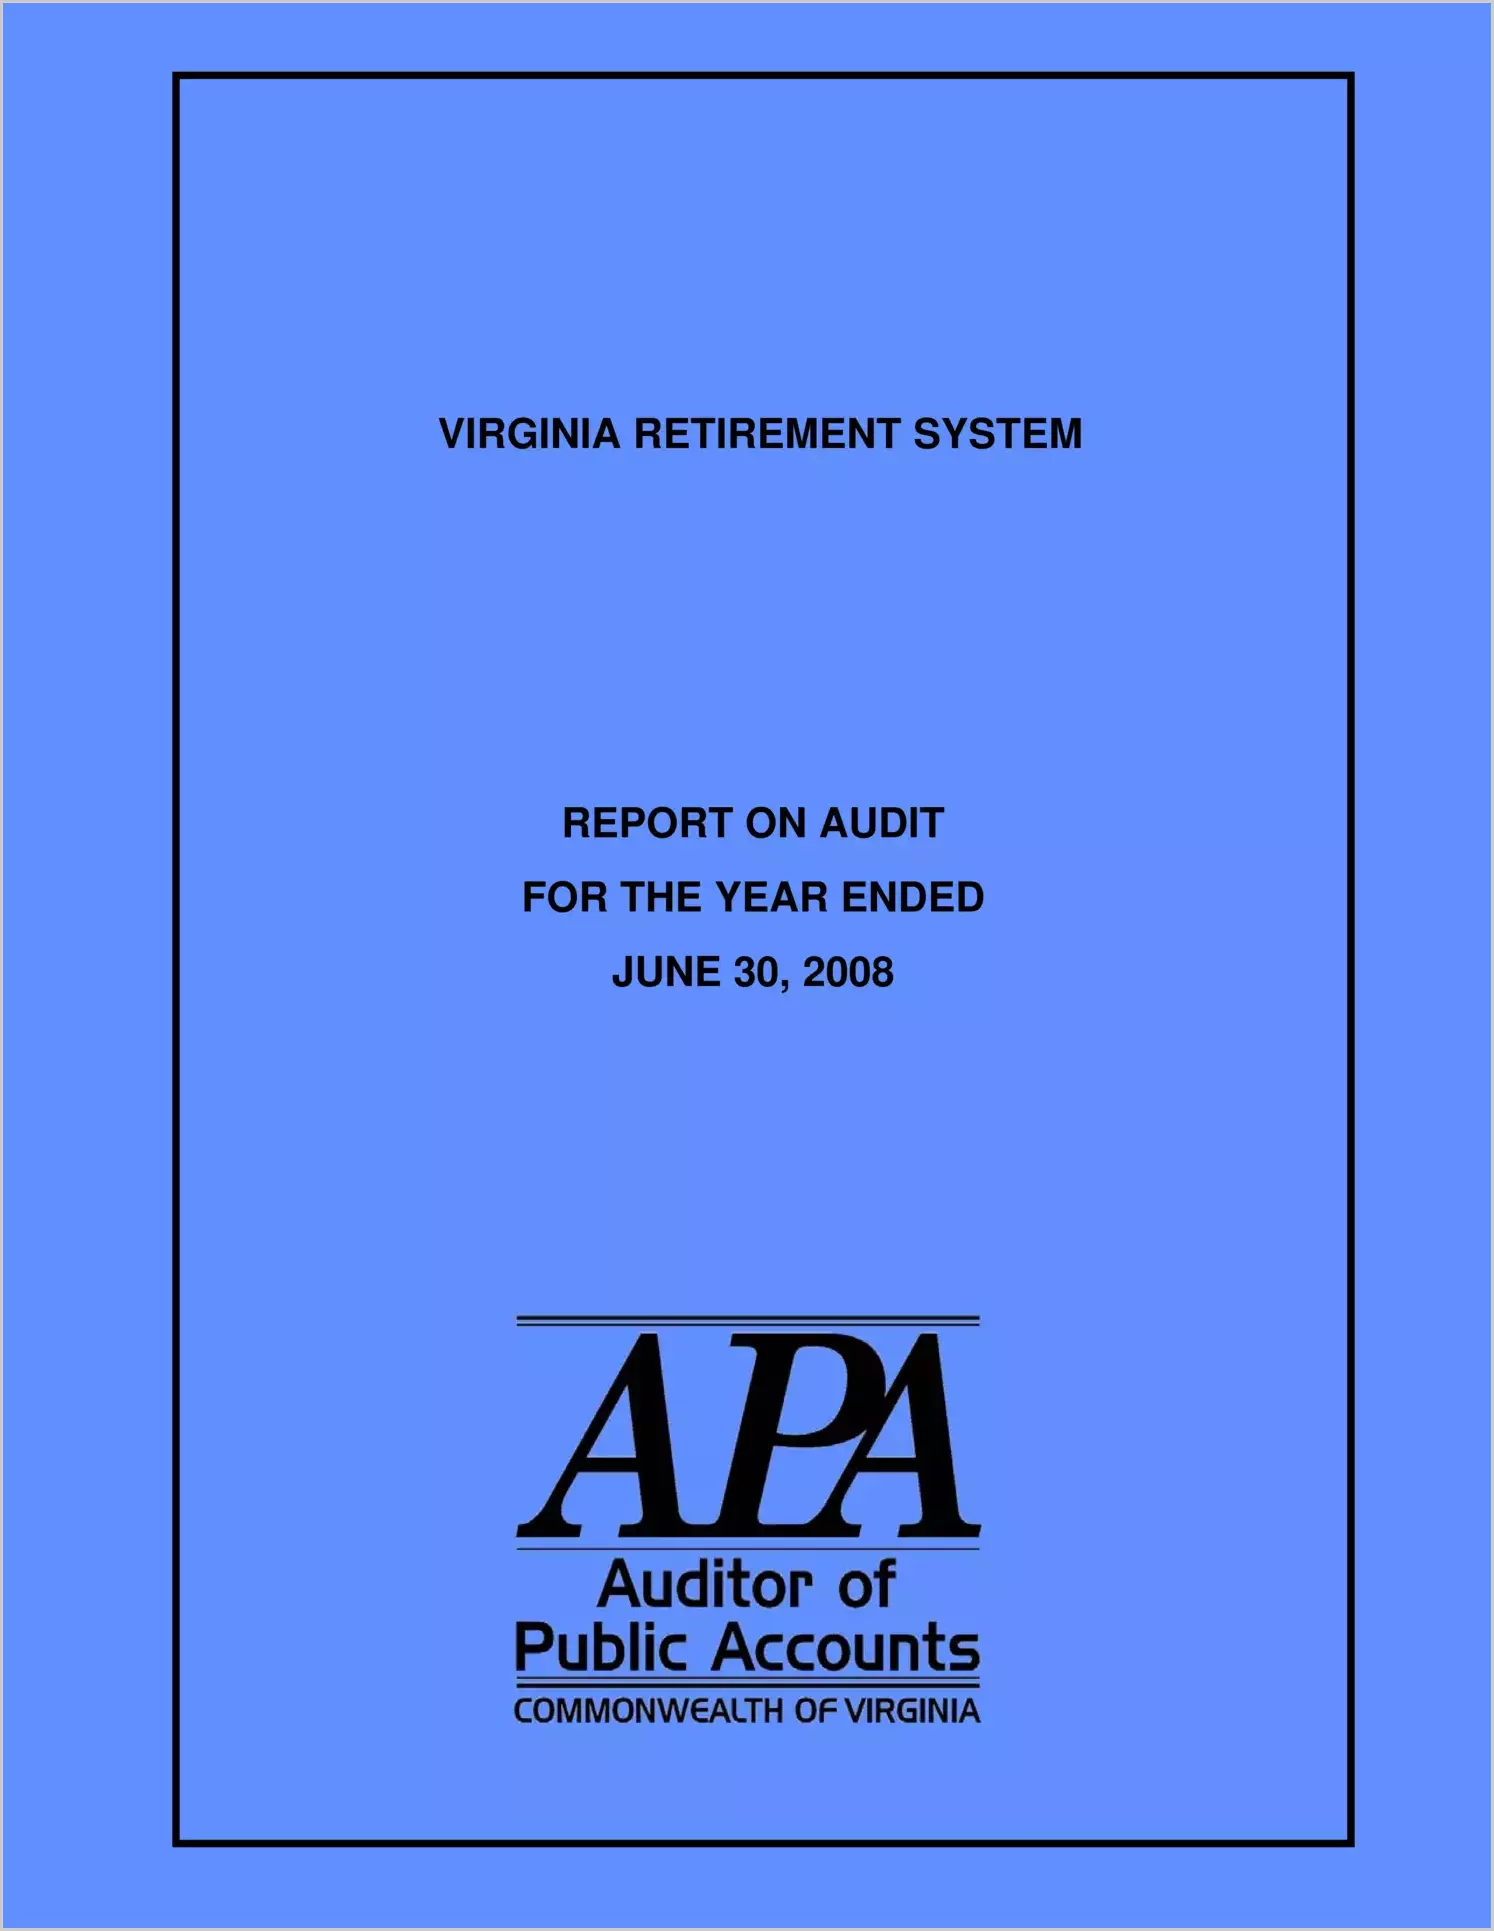 Virginia Retirement System for the year ended June 30, 2008